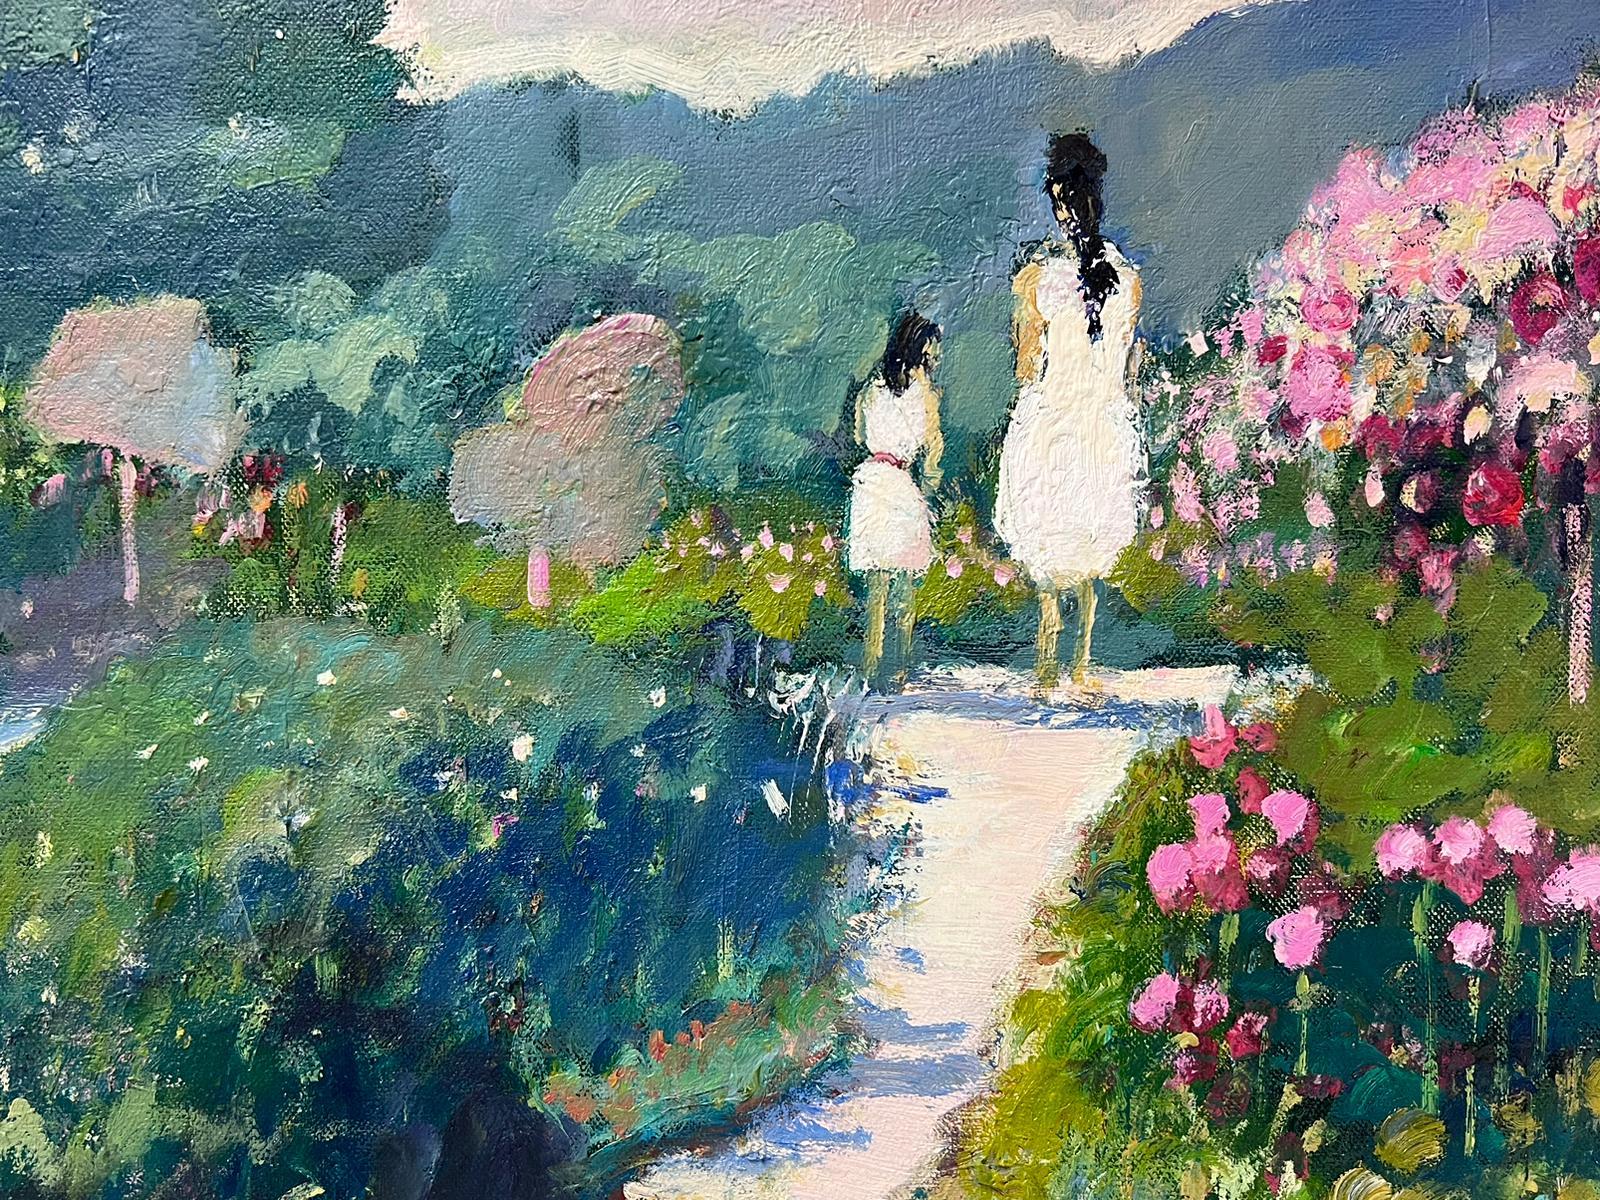 Artist/ School: Guy Benard (French b.1928) signed lower corner. Painter from Rouen, Normandy, exhibited throughout France. 

Title: Jardin

Medium:  oil on canvas, unframed and inscribed verso

size: 18 x 22 inches

Provenance: private collection,